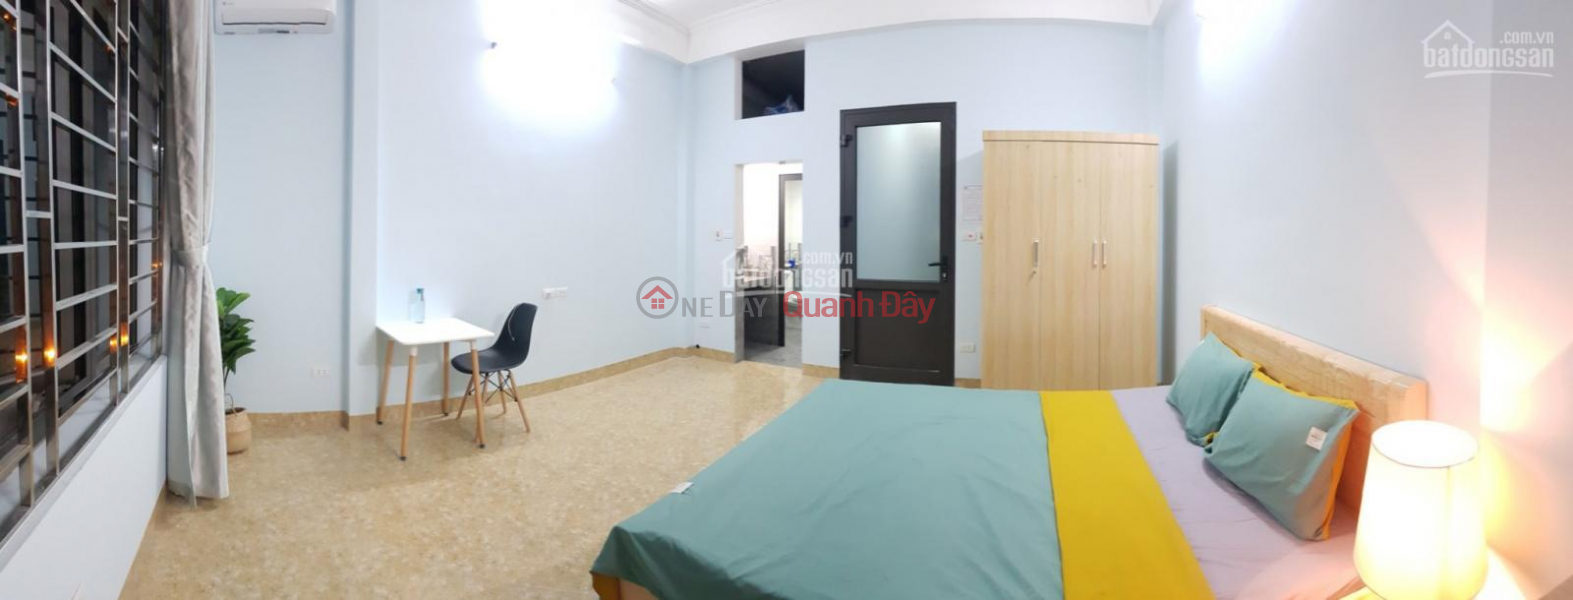 ₫ 3.2 Million/ month Room for rent in a mini apartment in Tran Cung street